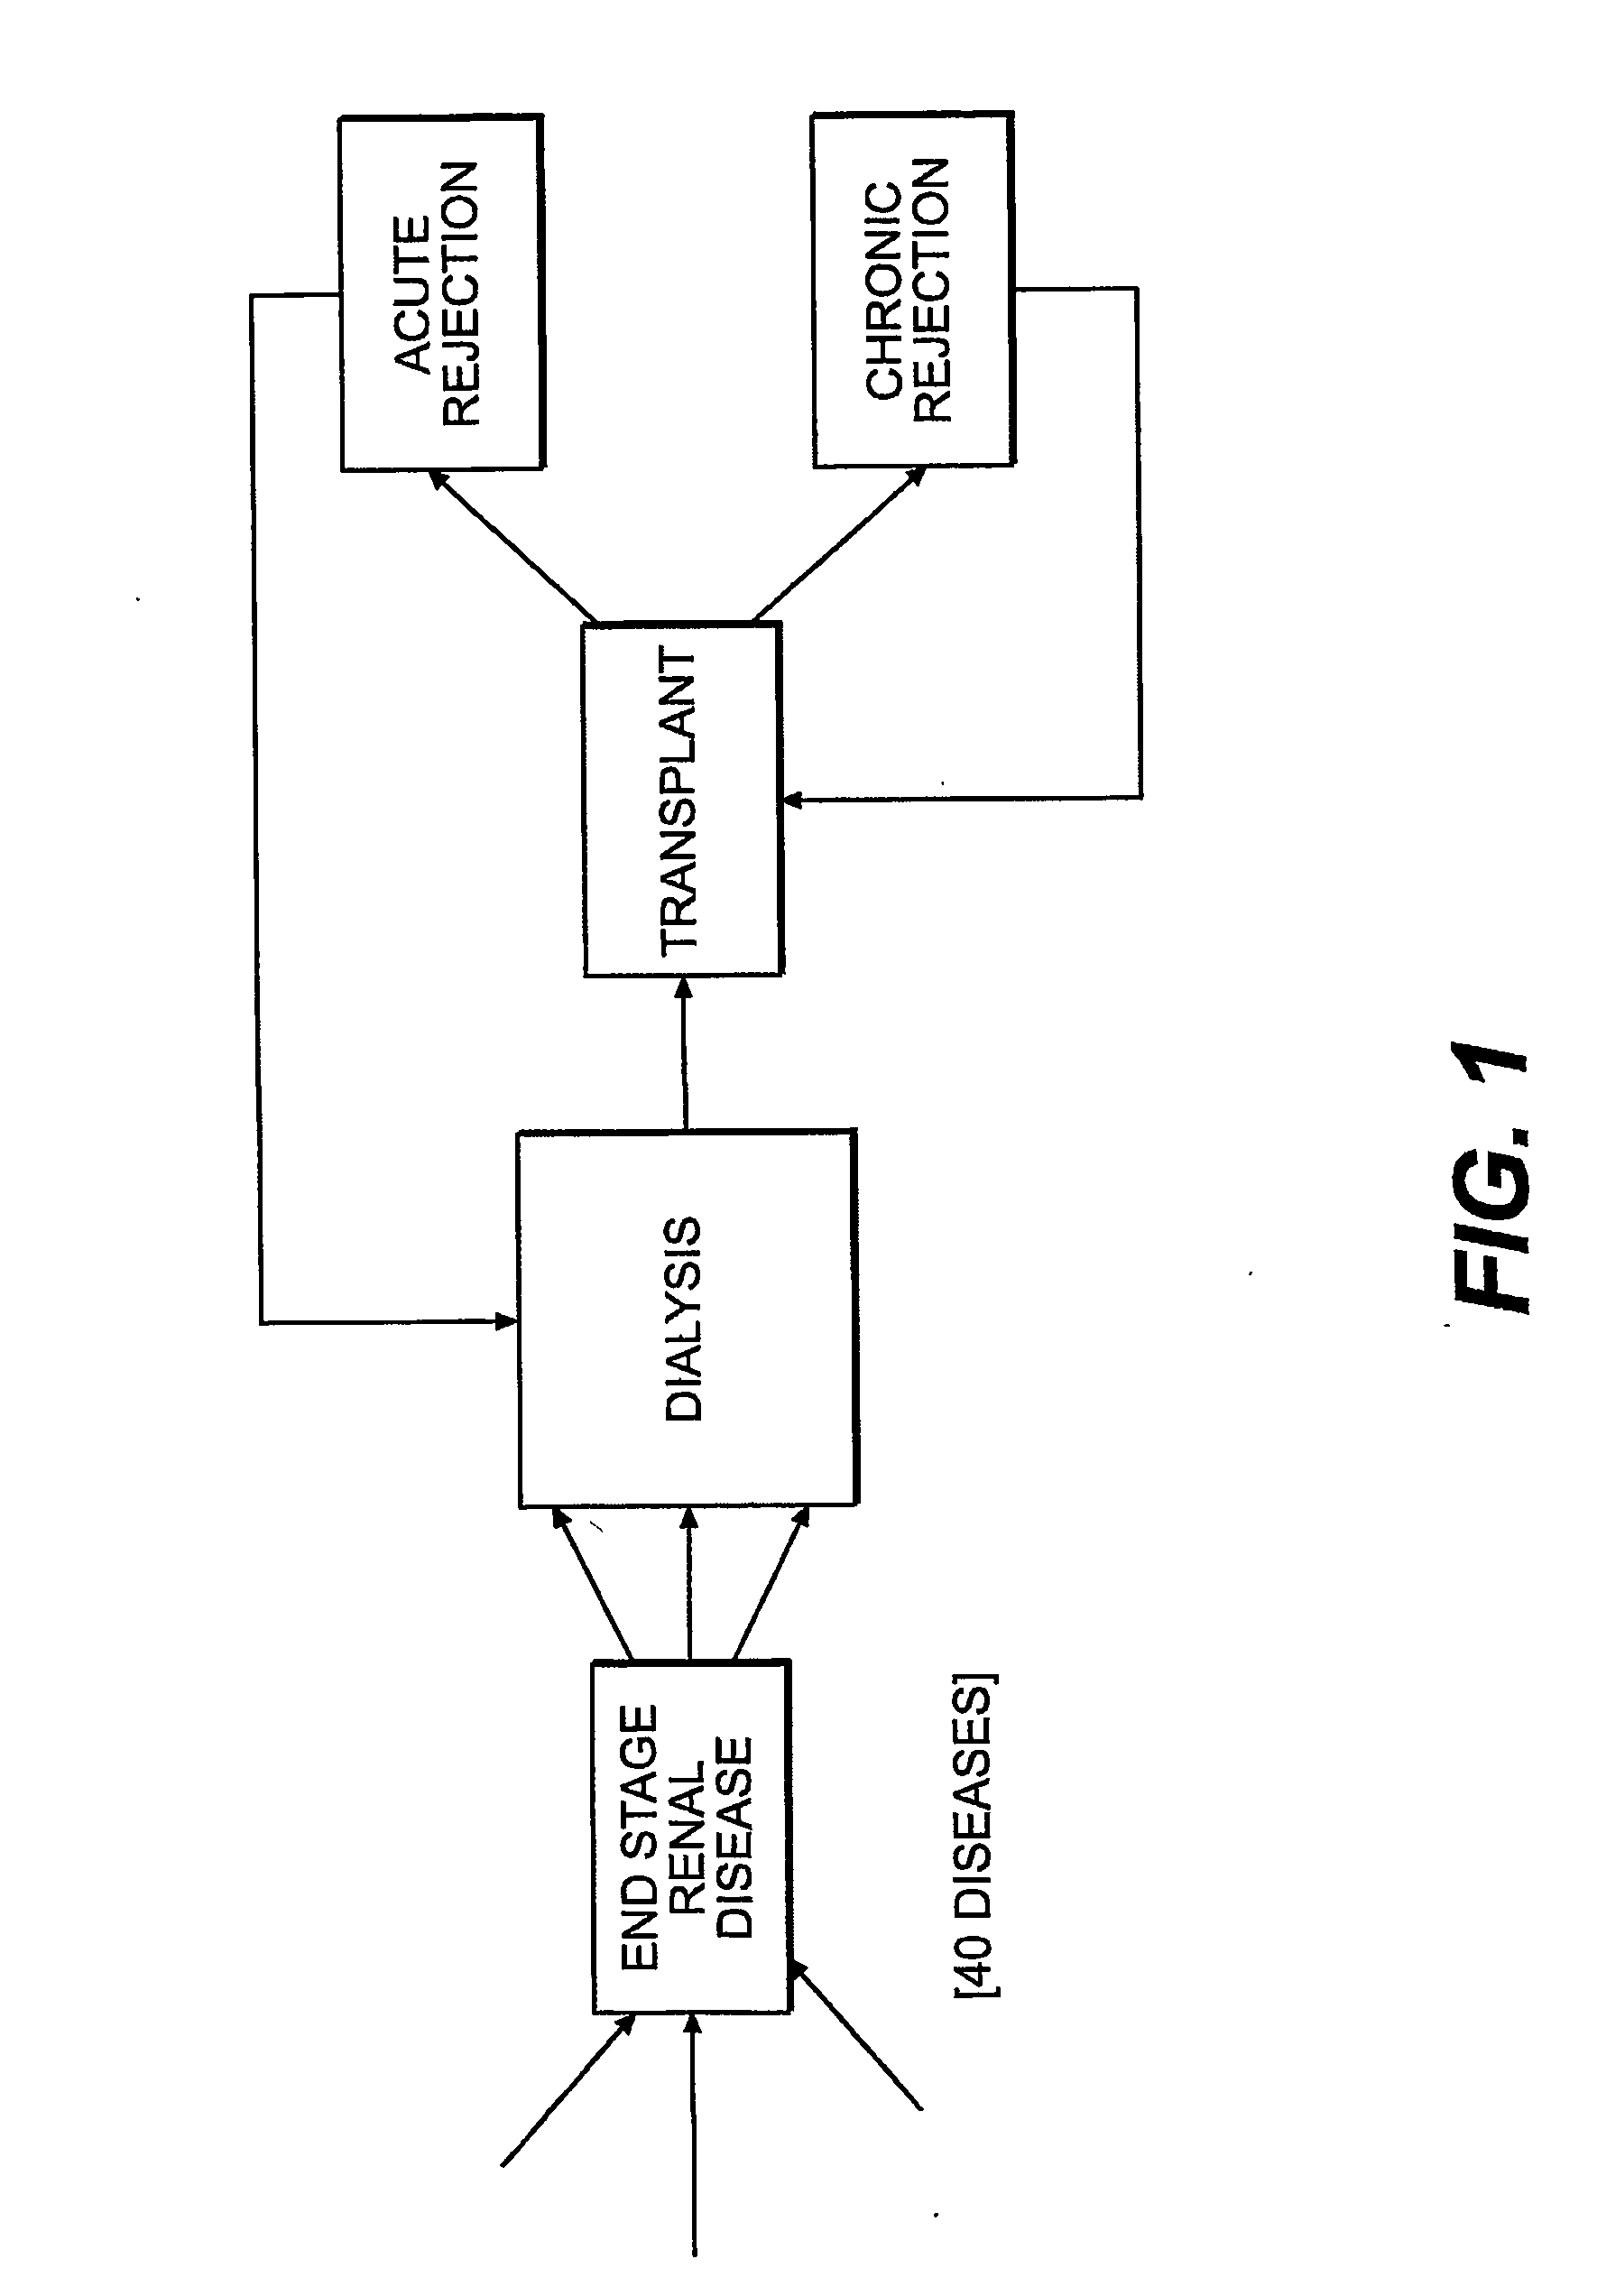 Information processing method for disease stratification and assessment of disease progressing